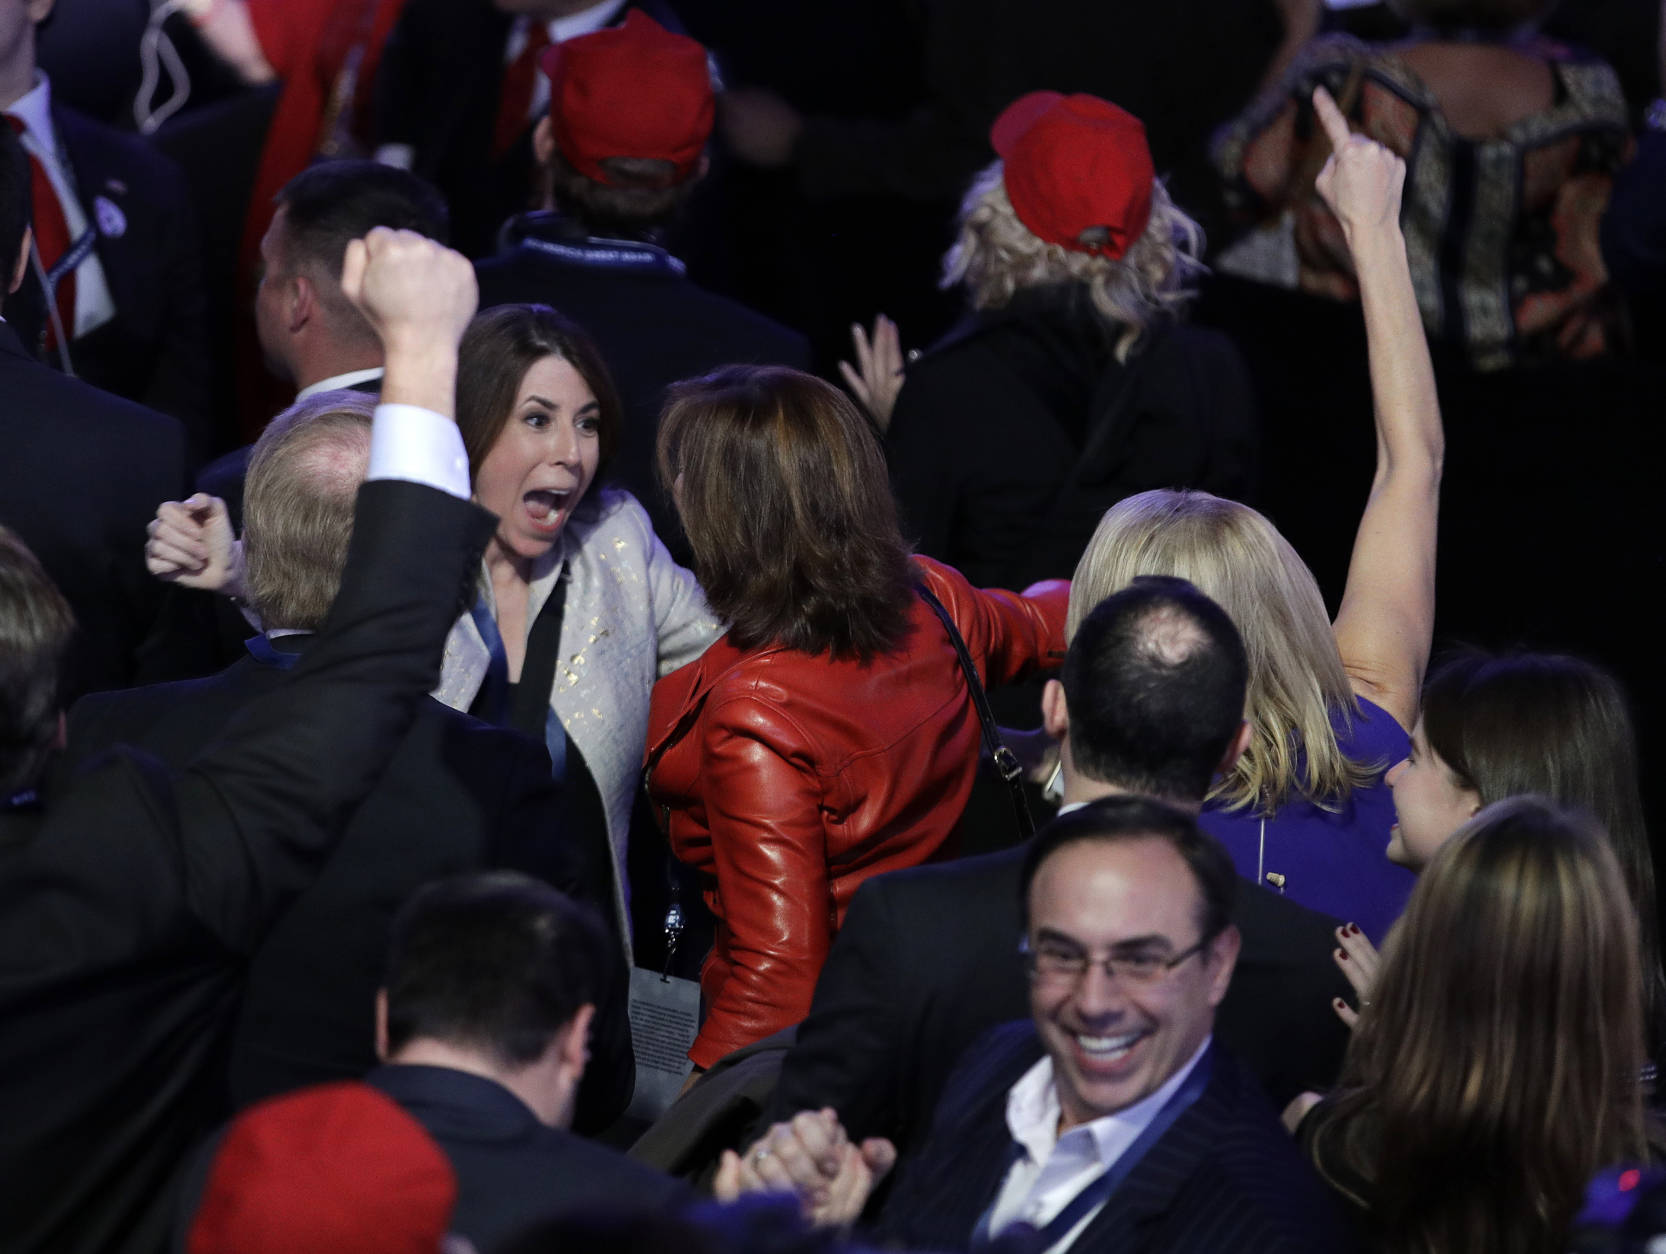 Supporters of Republican presidential candidate Donald Trump react as they watch the election results during Trump's election night rally, Tuesday, Nov. 8, 2016, in New York. (AP Photo/John Locher)